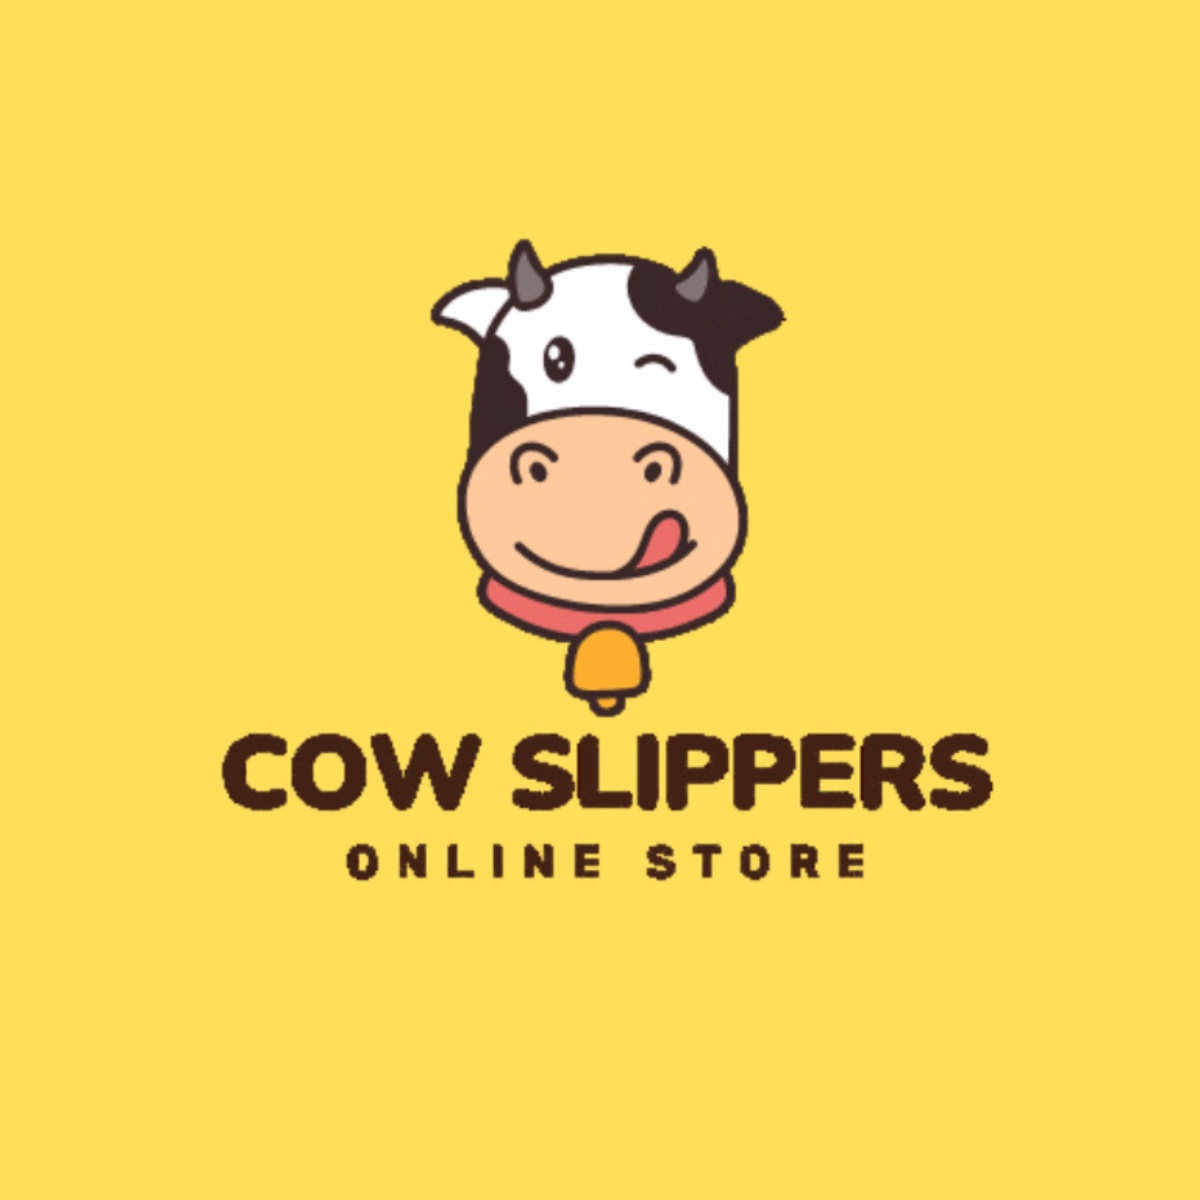 How to Find the Best Deals at the Cow Slippers Online Store